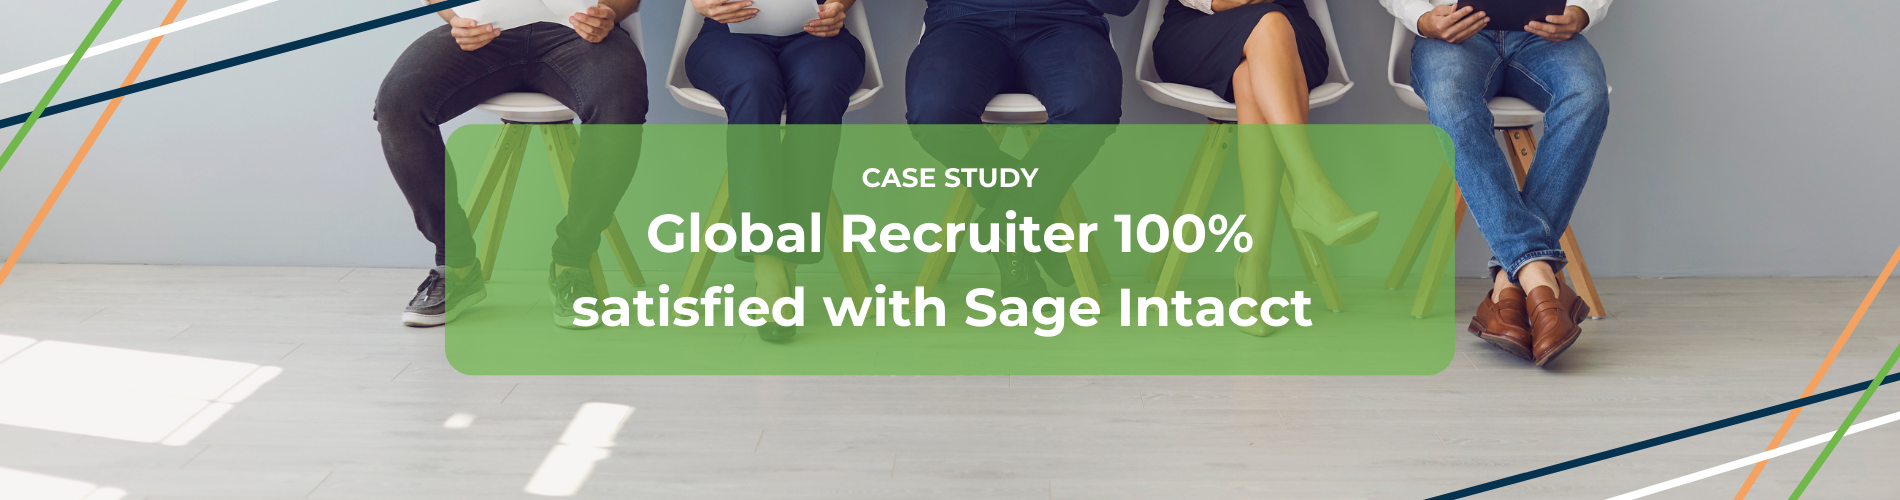 London-based Global recruiter says they are 100% satisfied with Sage Intacct & Acuity